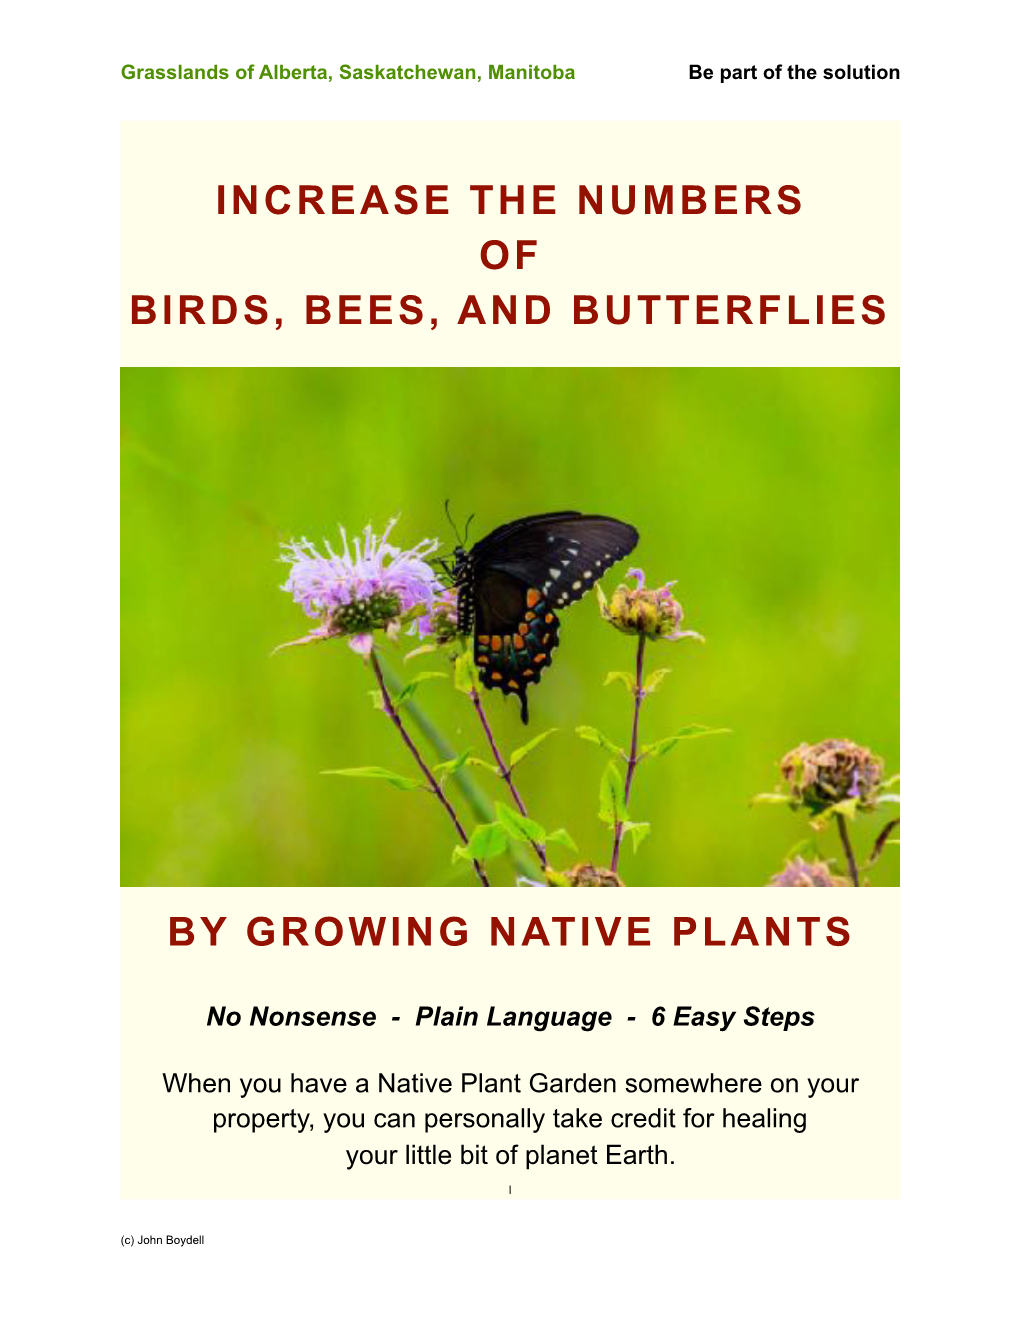 Increase the Numbers of Birds, Bees, and Butterflies